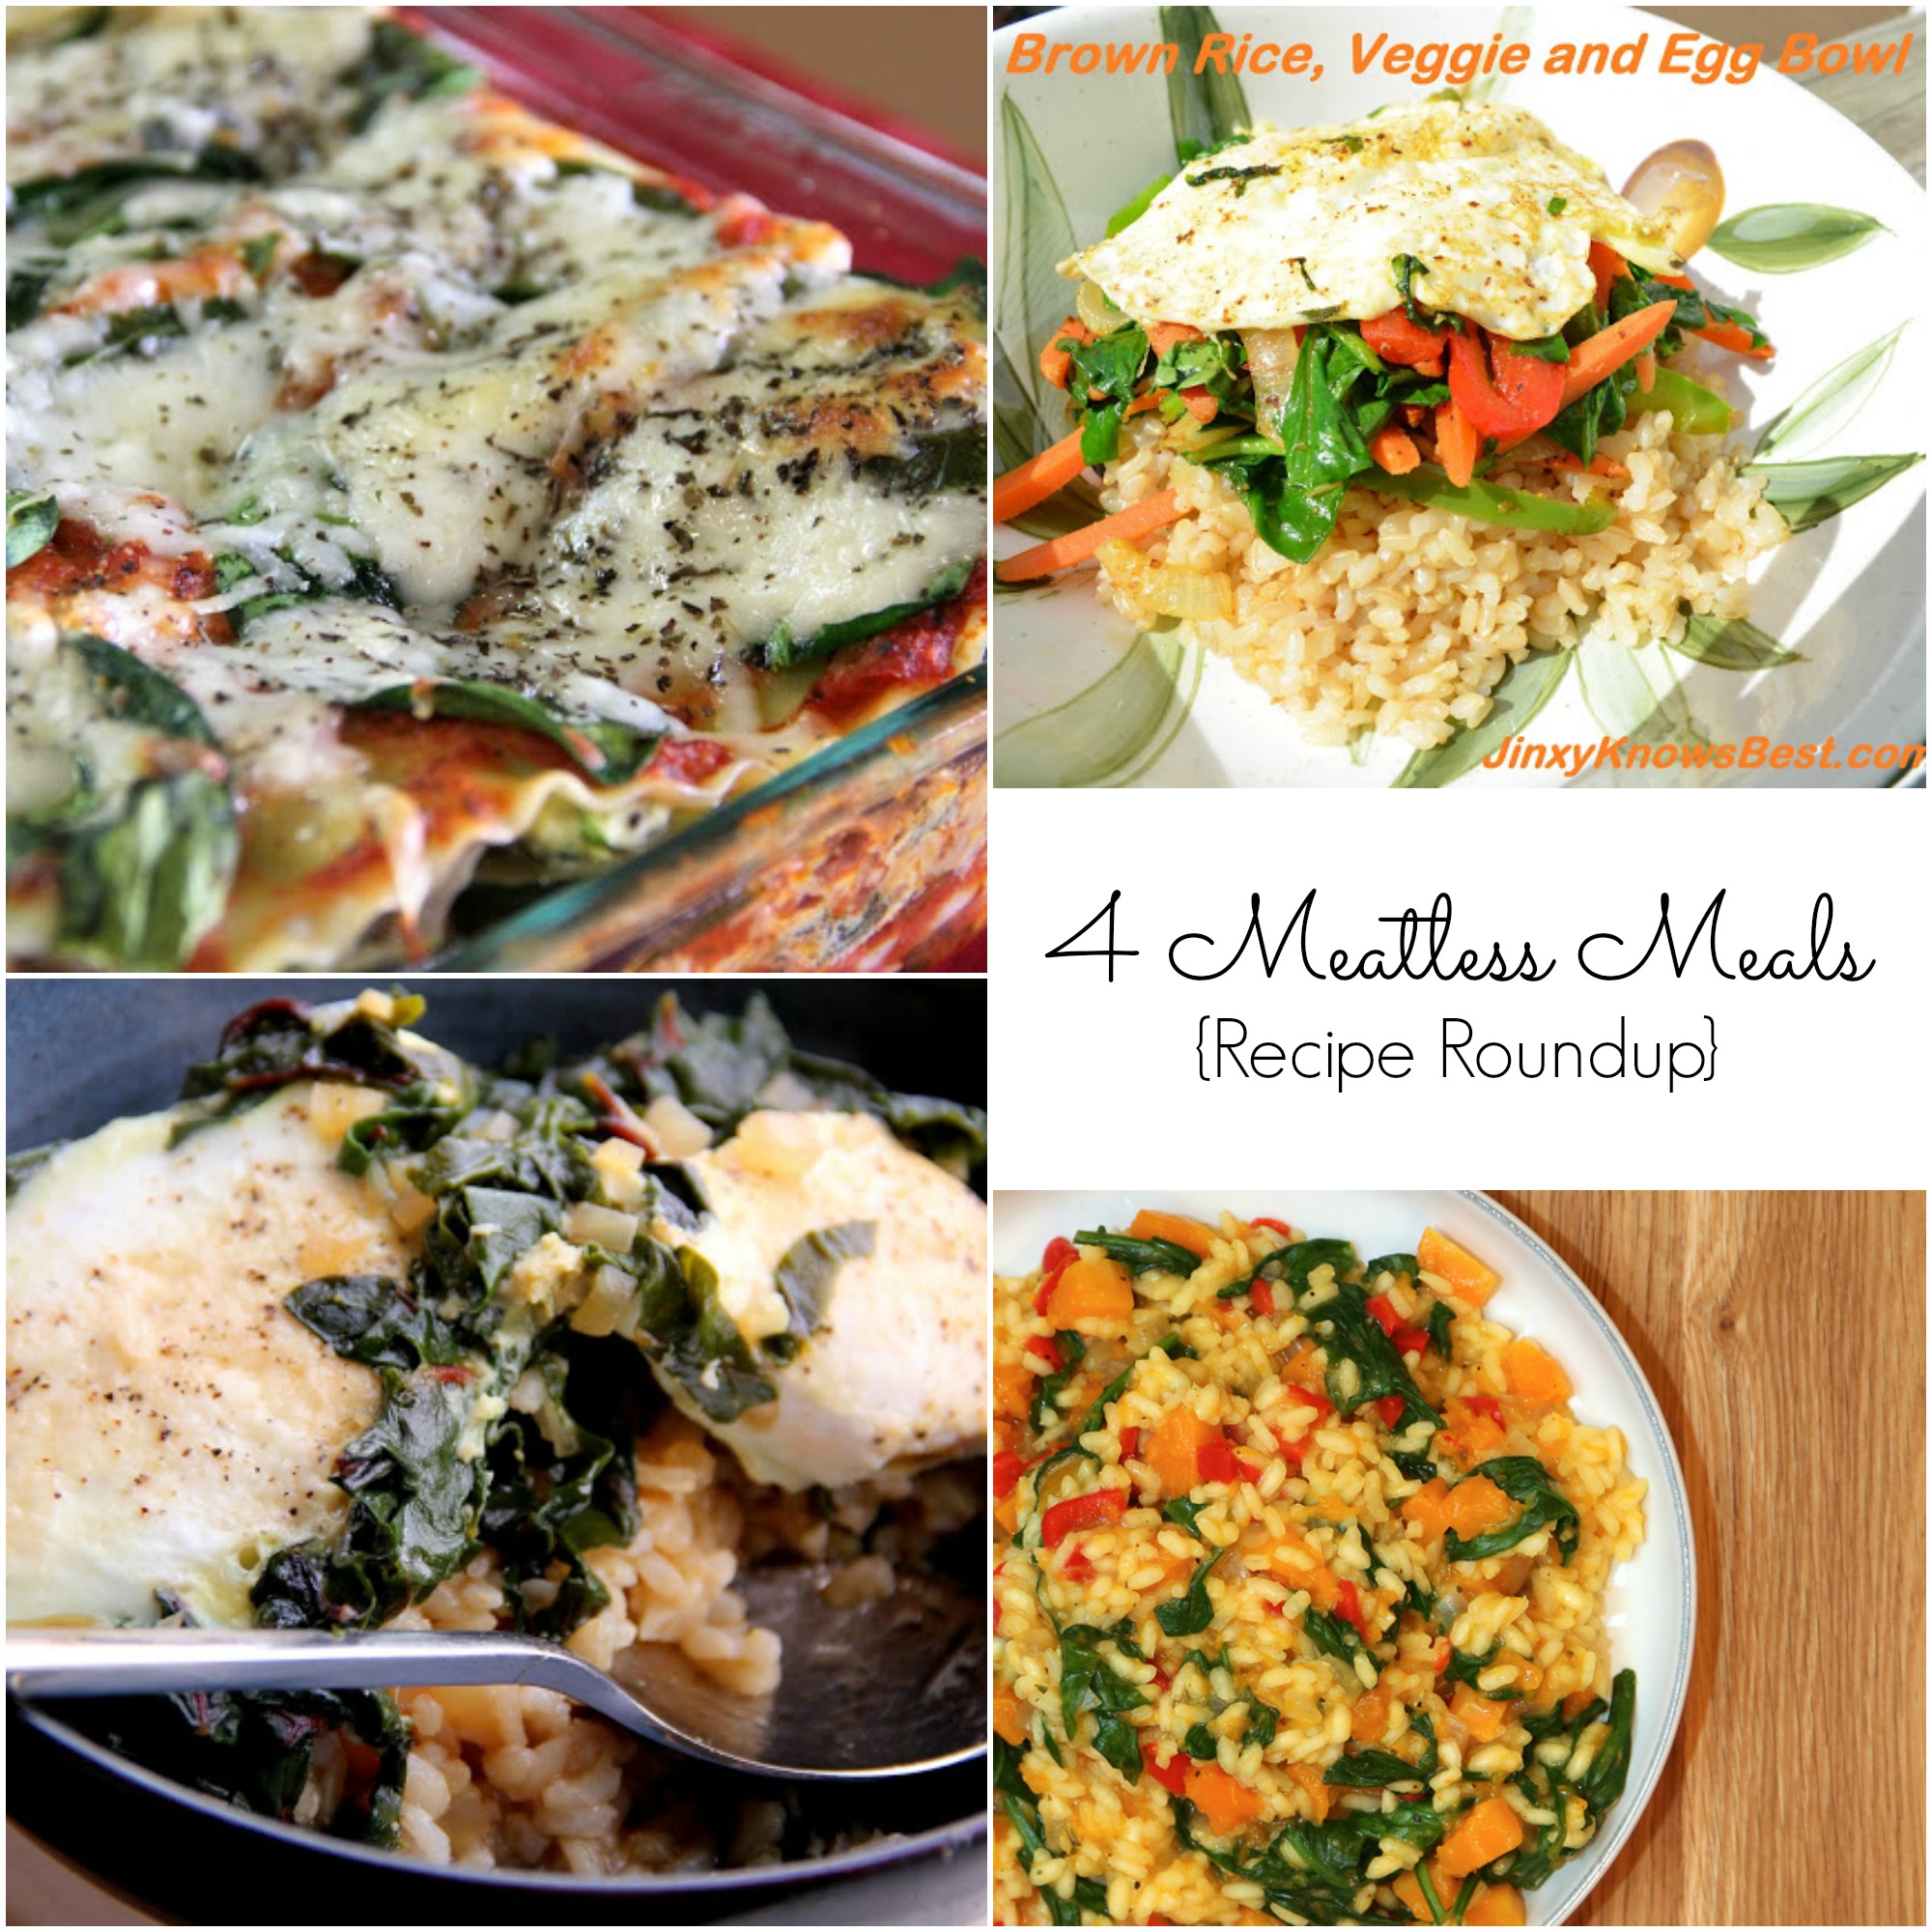 meatless meal recipes, vegetarian dishes, egg recipes